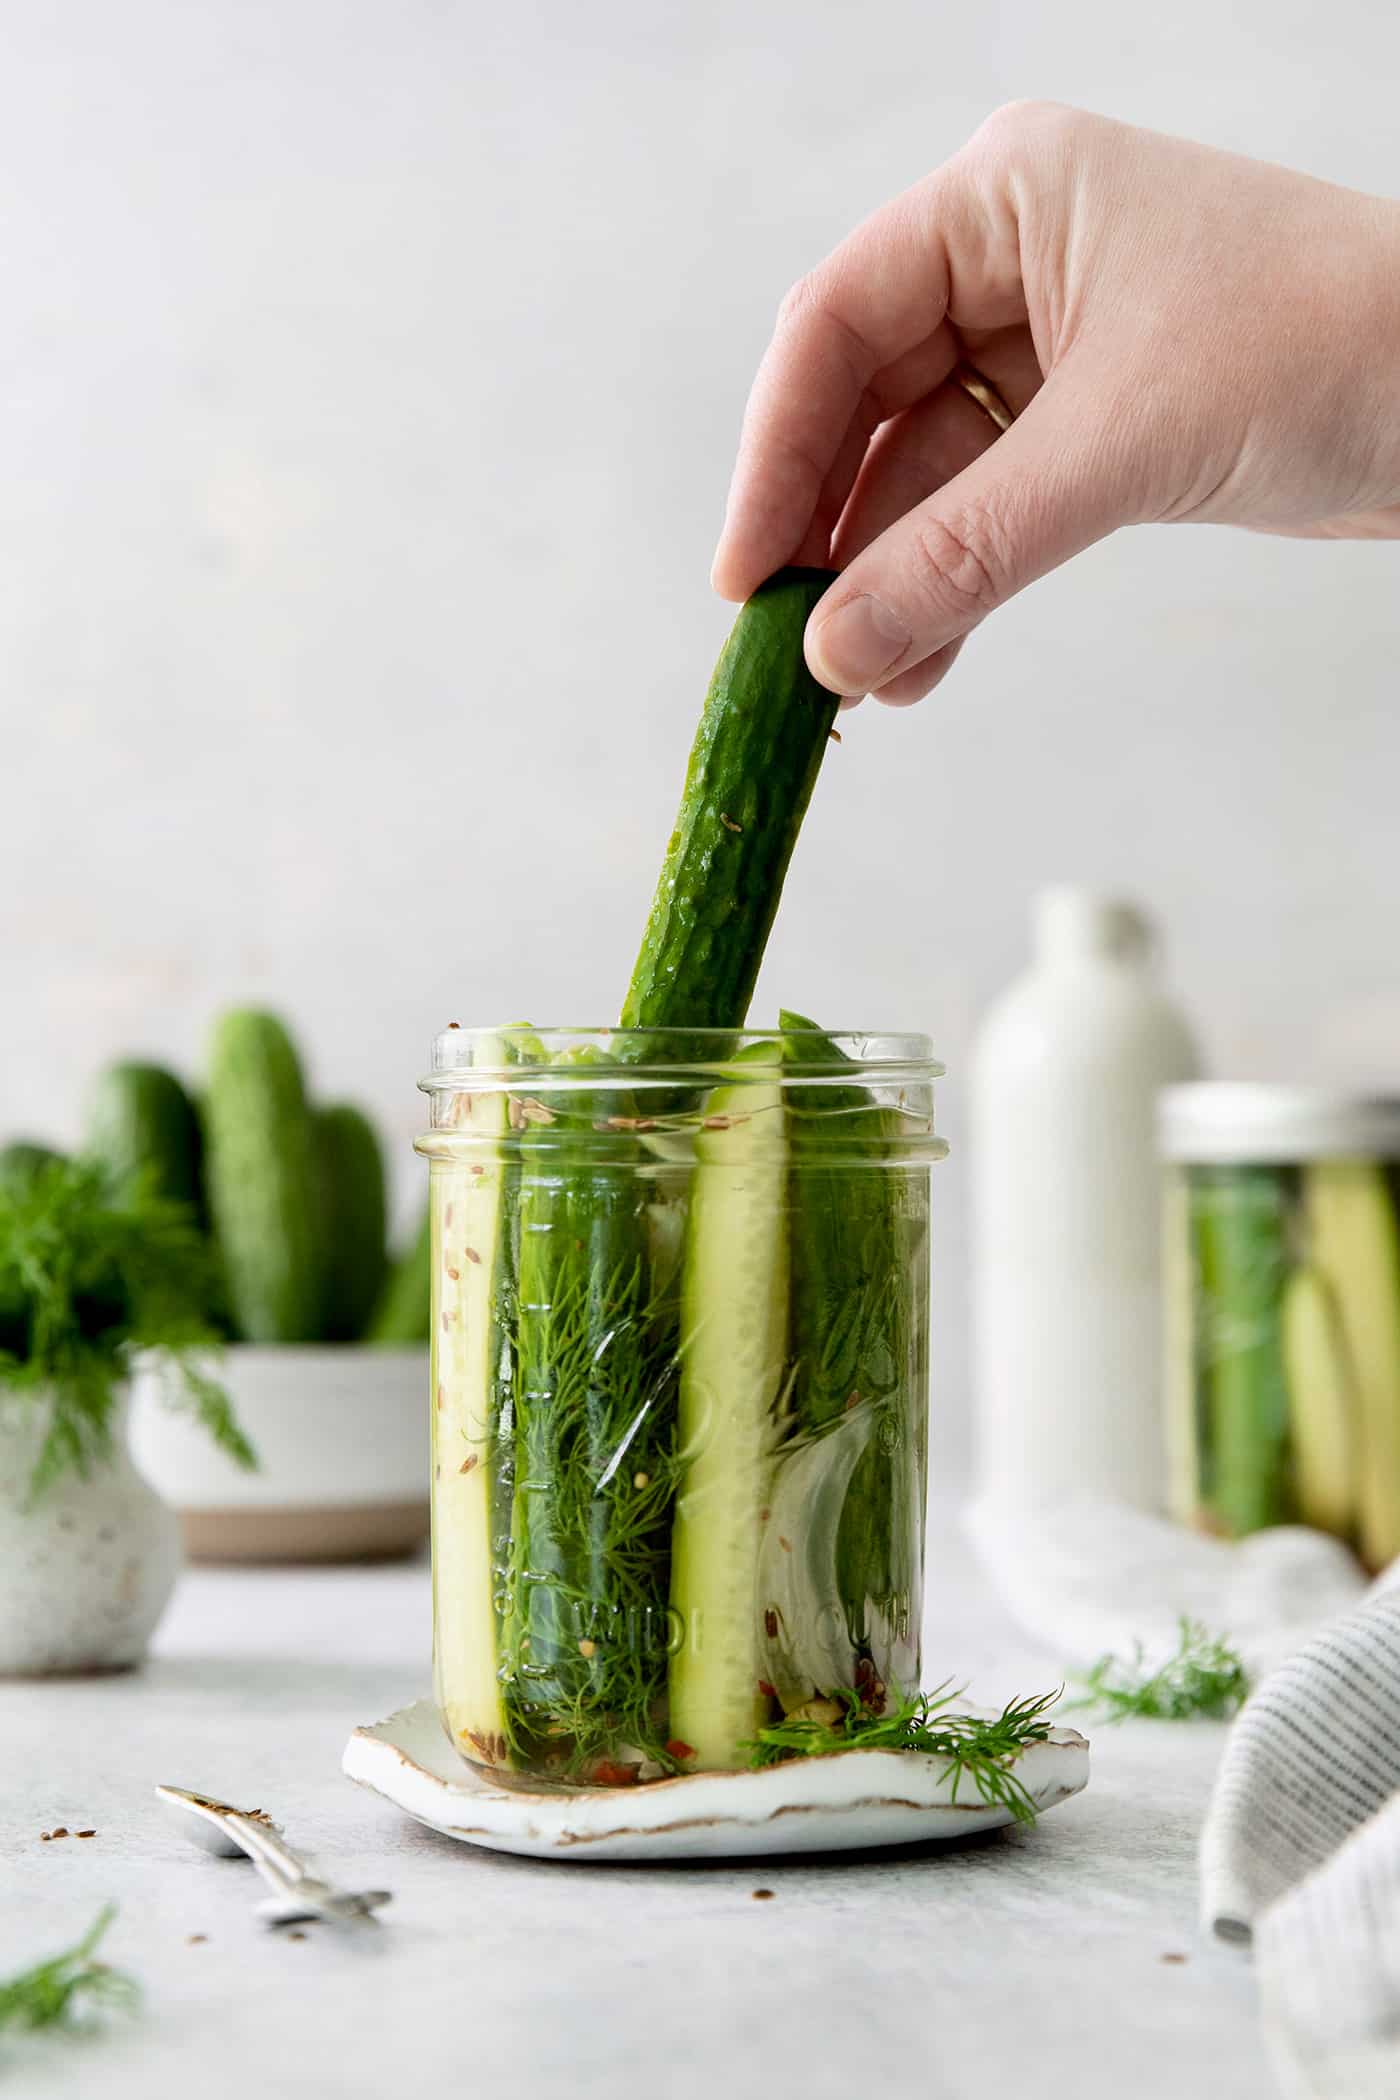 A hand pulling a dill pickle spear from a jar